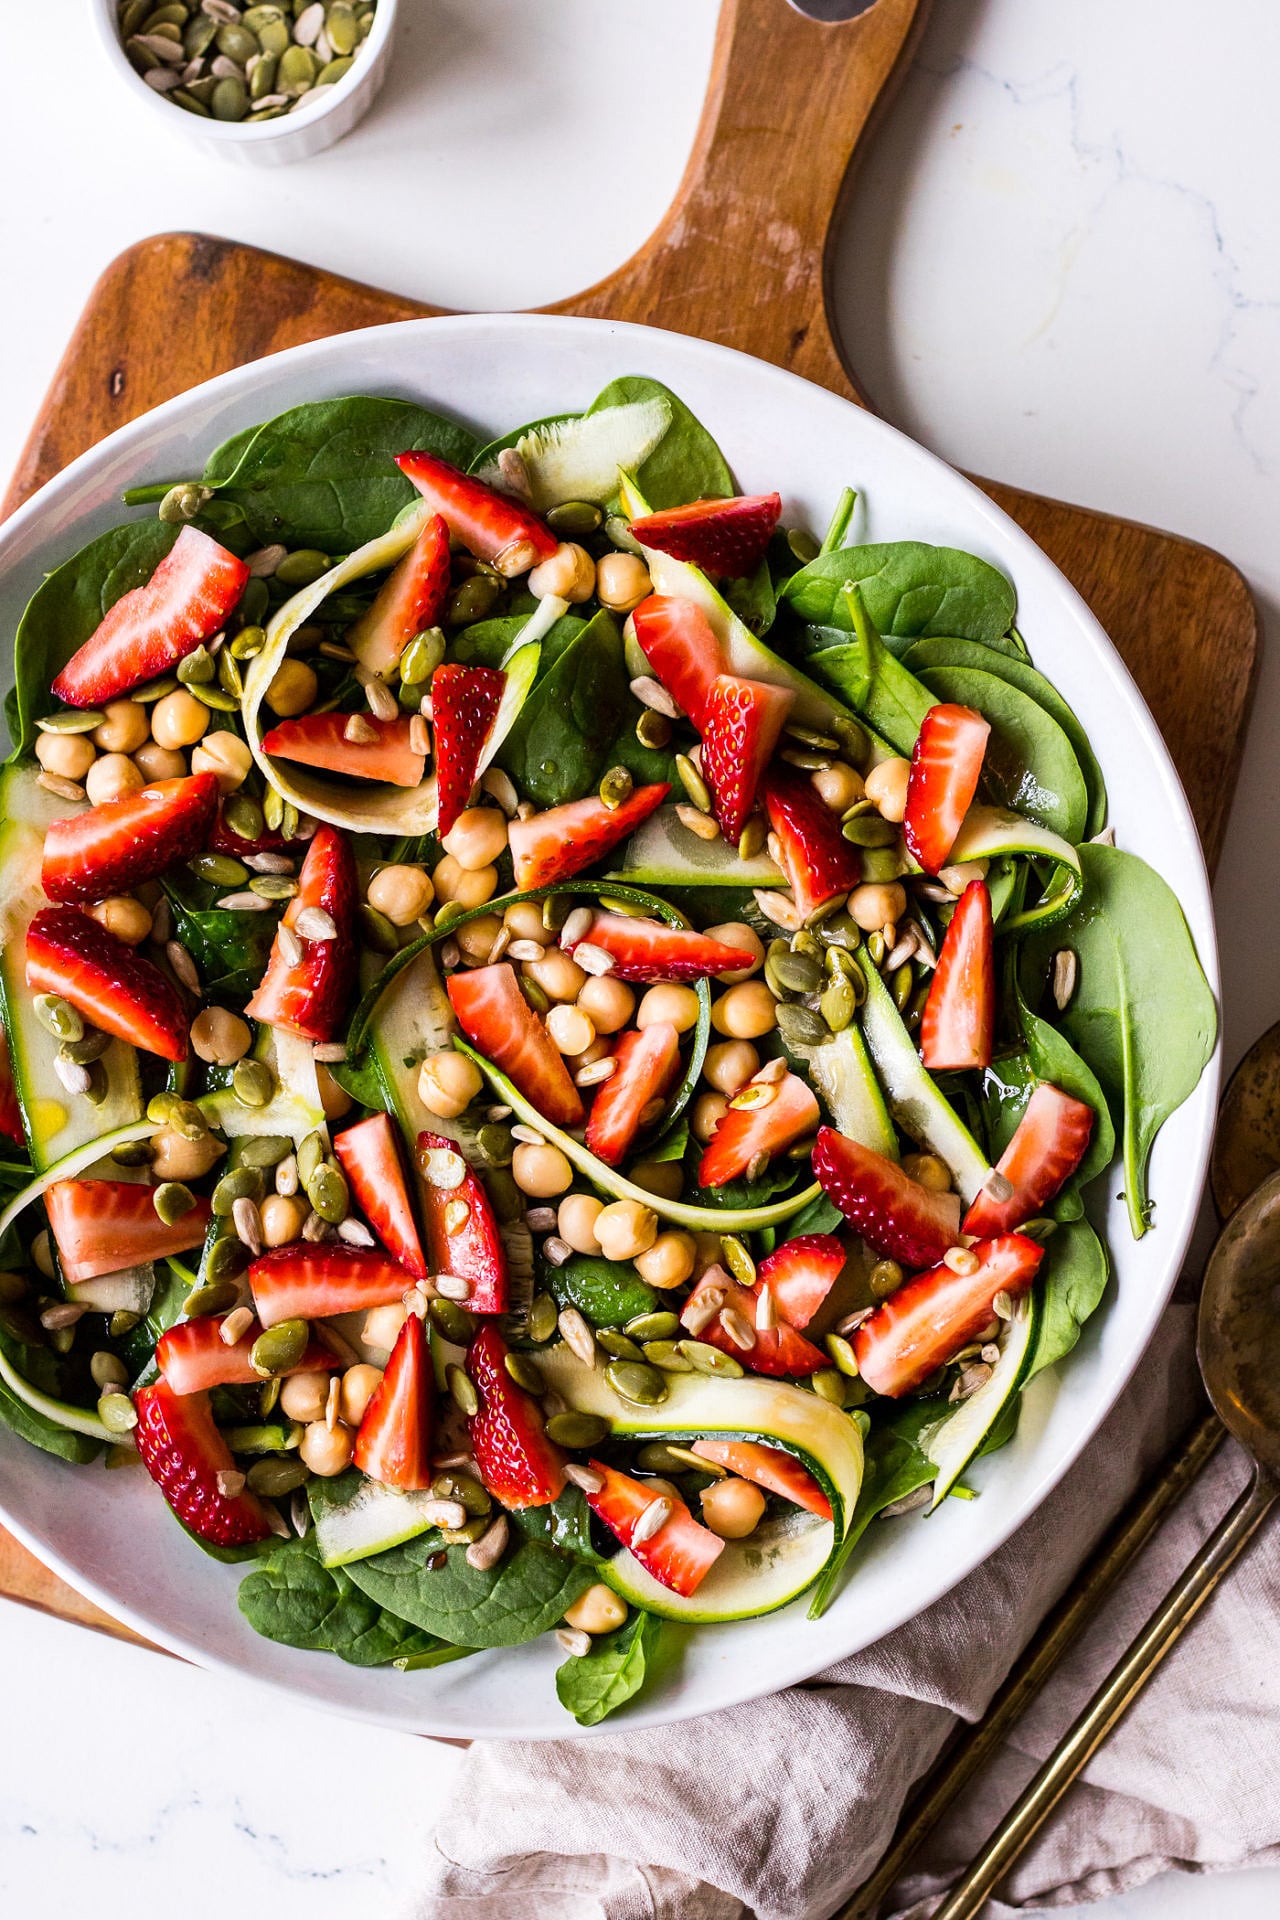 Strawberry, chickpea and spinach salad in a wide bowl on wooden chopping board